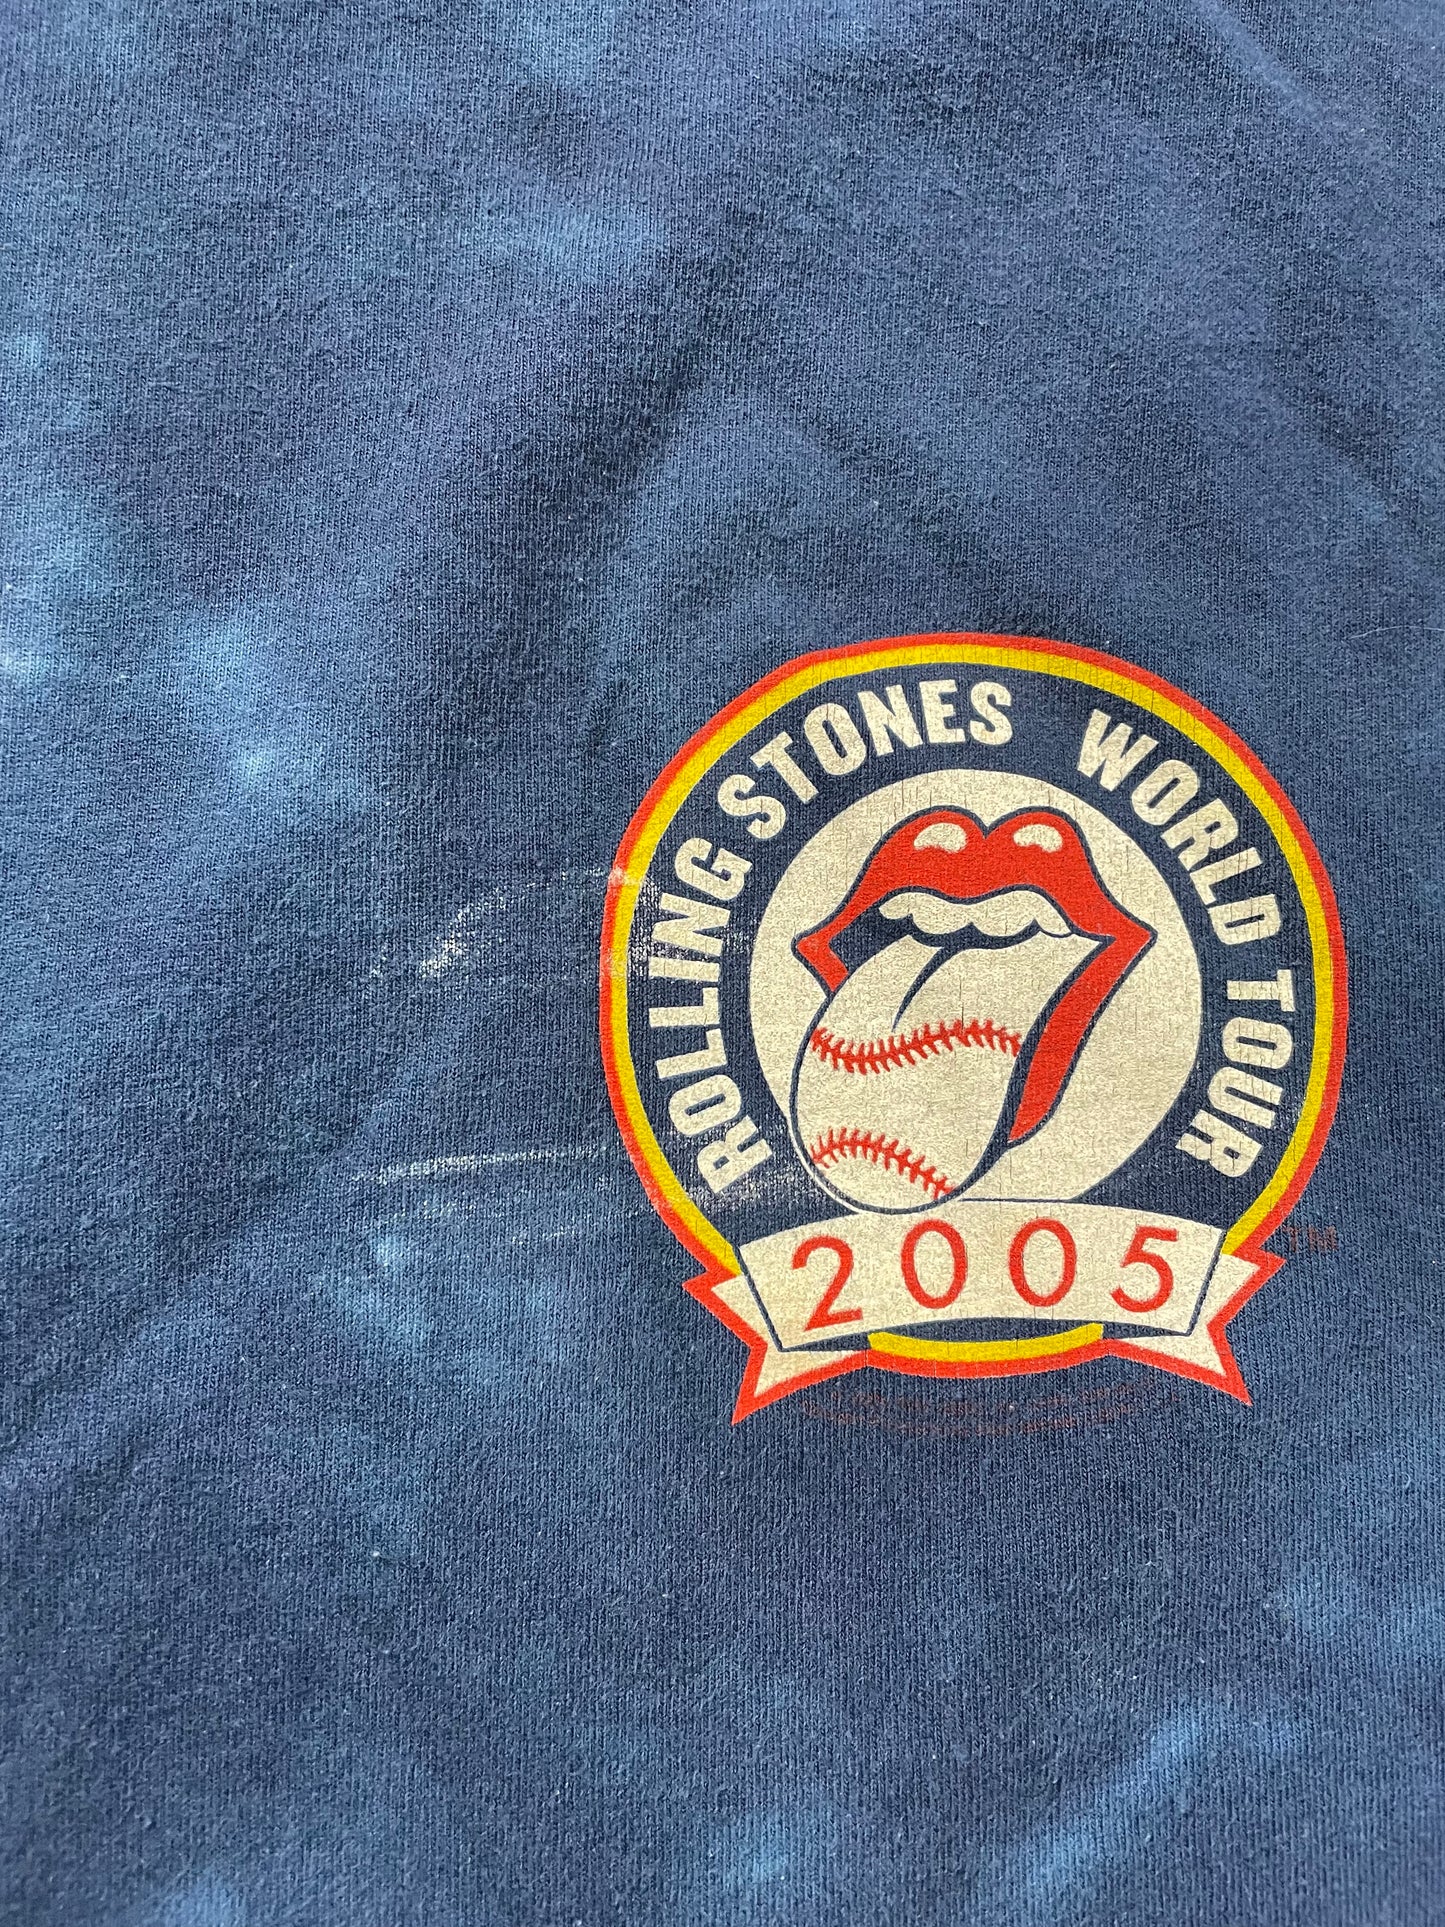 2005 Rolling Stones Boston Red Sox Tour Tee